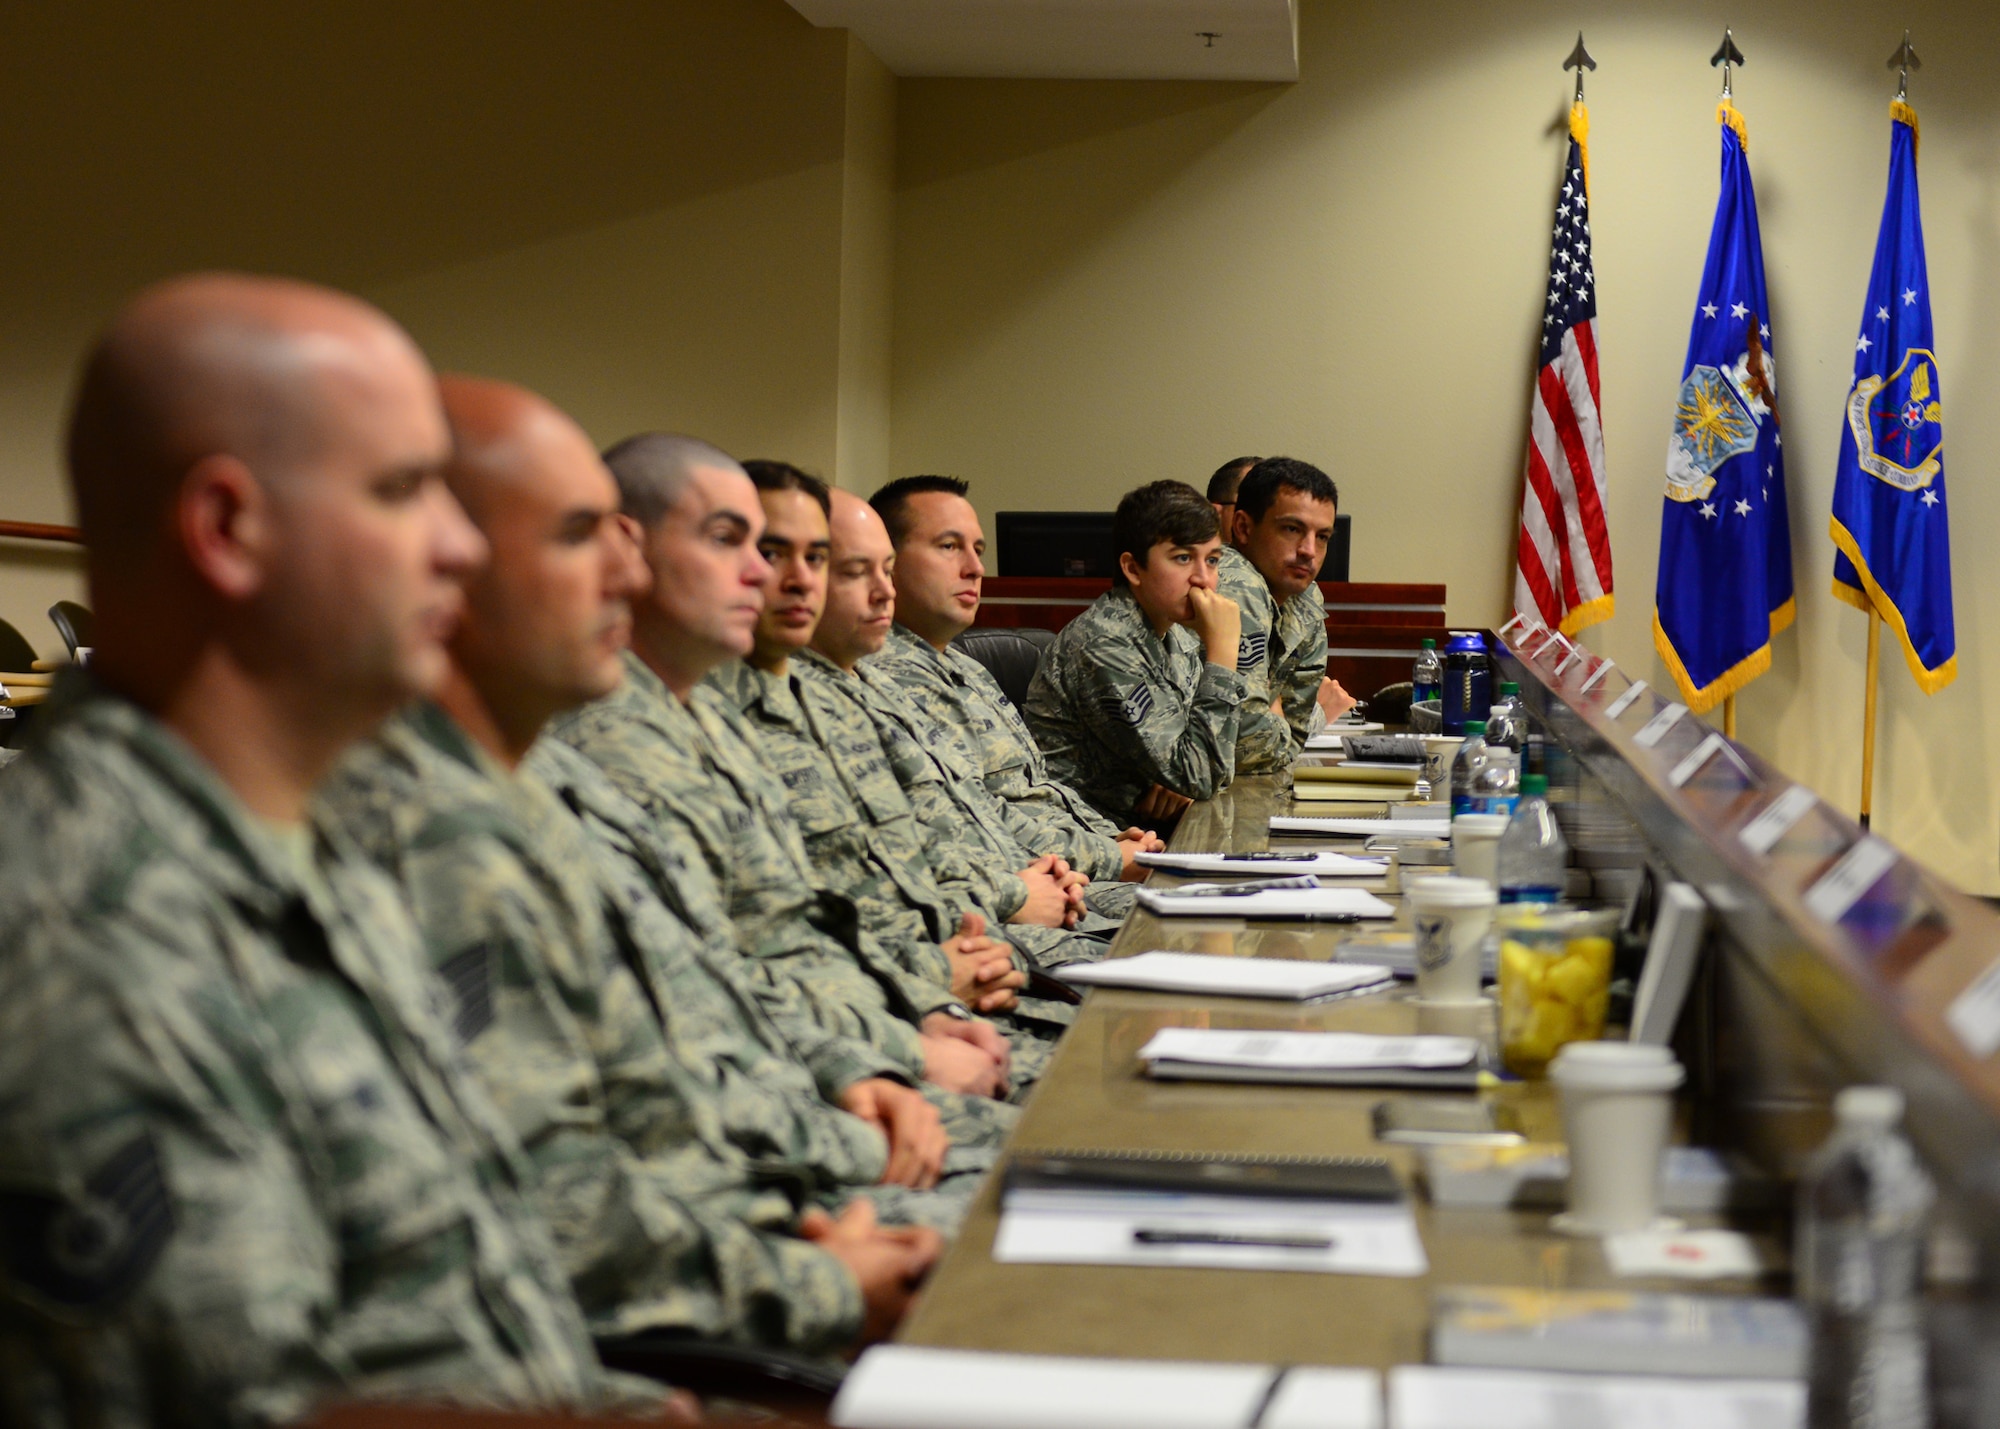 Technical and staff sergeants from Air Force Global Strike Command listen to some of the military’s top leaders at Striker Stripe, a leadership development conference on Barksdale Air Force Base, La., May 27, 2015. About 40 NCOs from AFGSC attended the conference where they enhance their leadership techniques. (U.S. Air Force photo/Airman 1st Class Luke Hill)